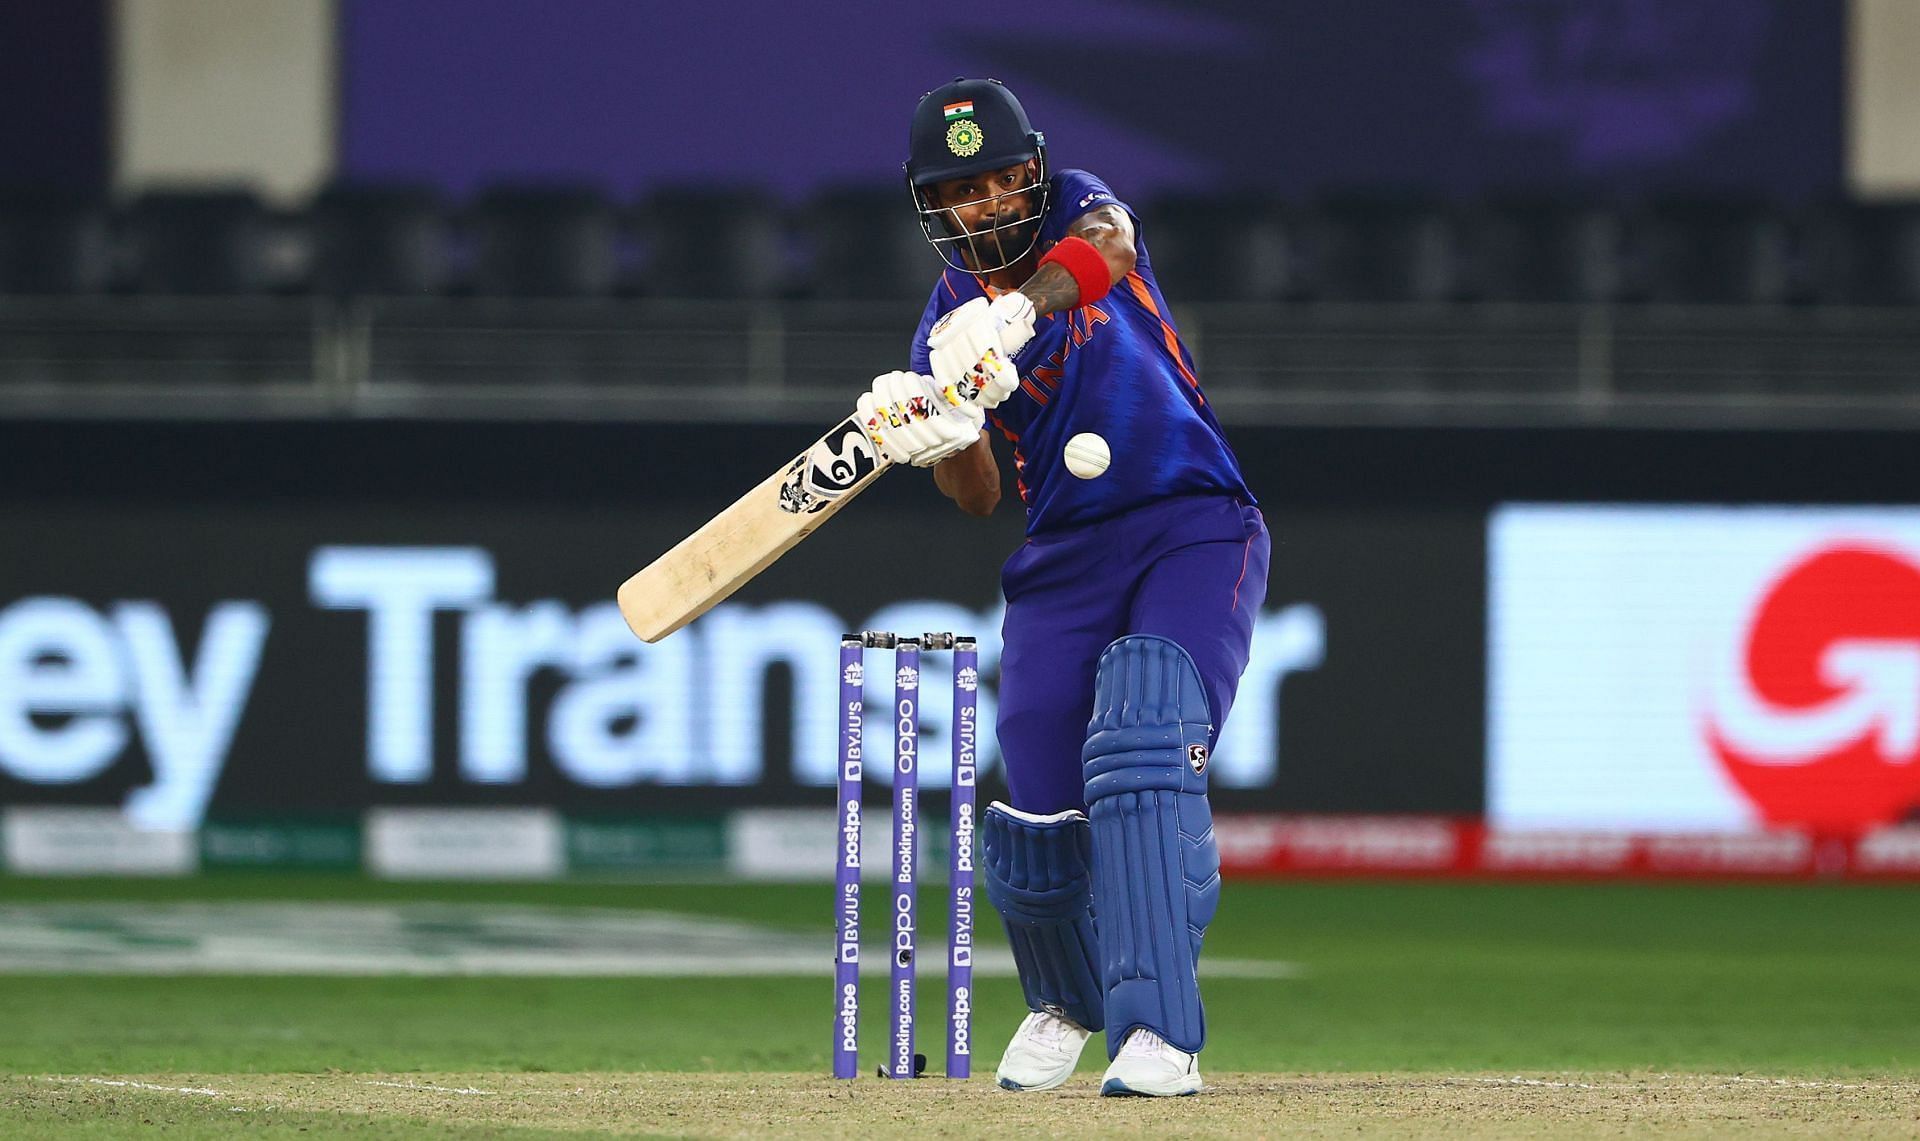 KL Rahul was at his beastly best in the highly unorthodox must-win game